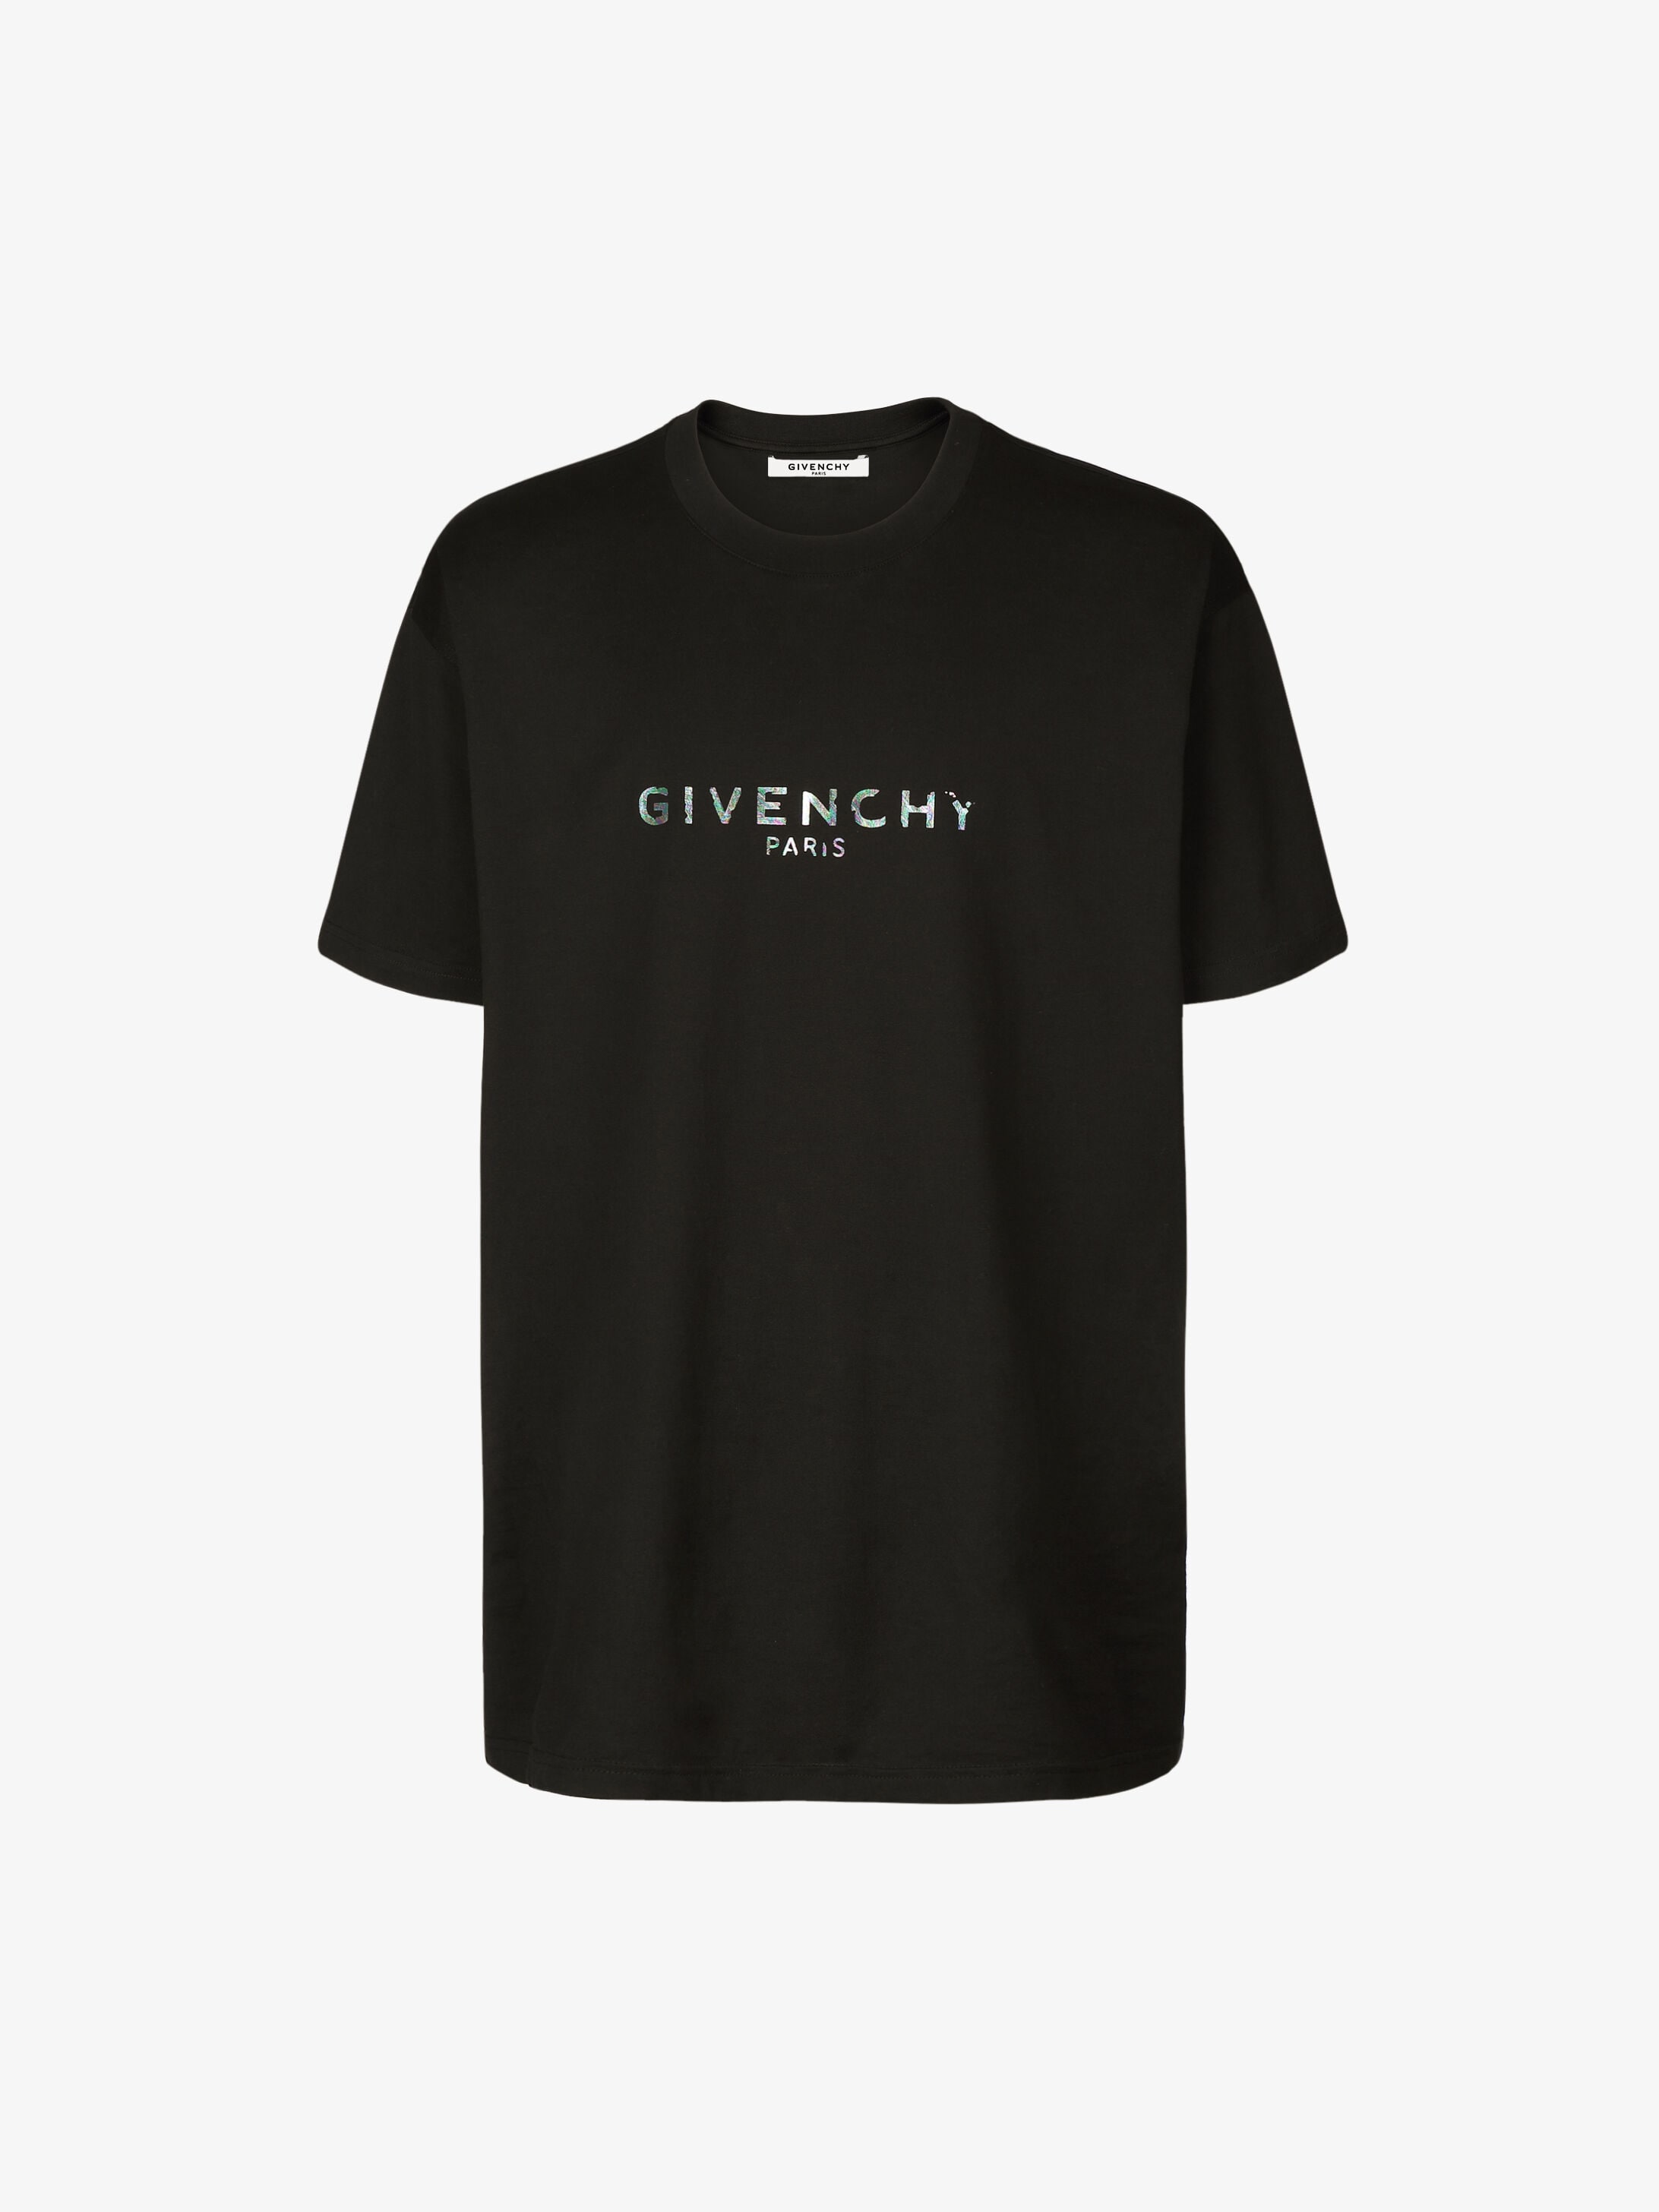 Givenchy Size Chart